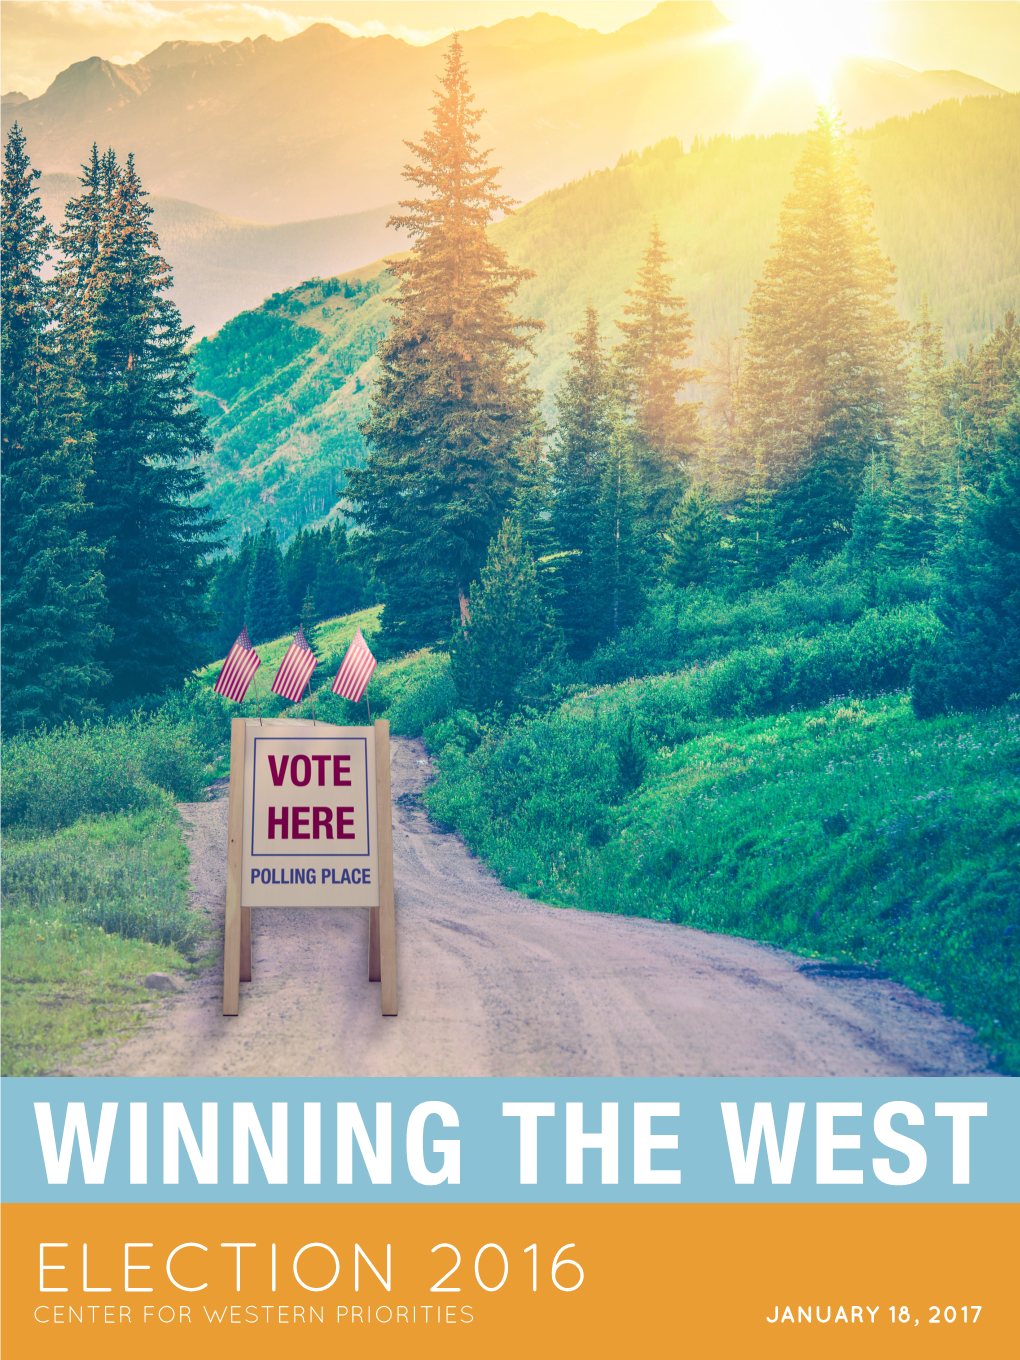 Winning the Westjuly 7, 2016 Election 2016 Center for Western Priorities January 18, 2017